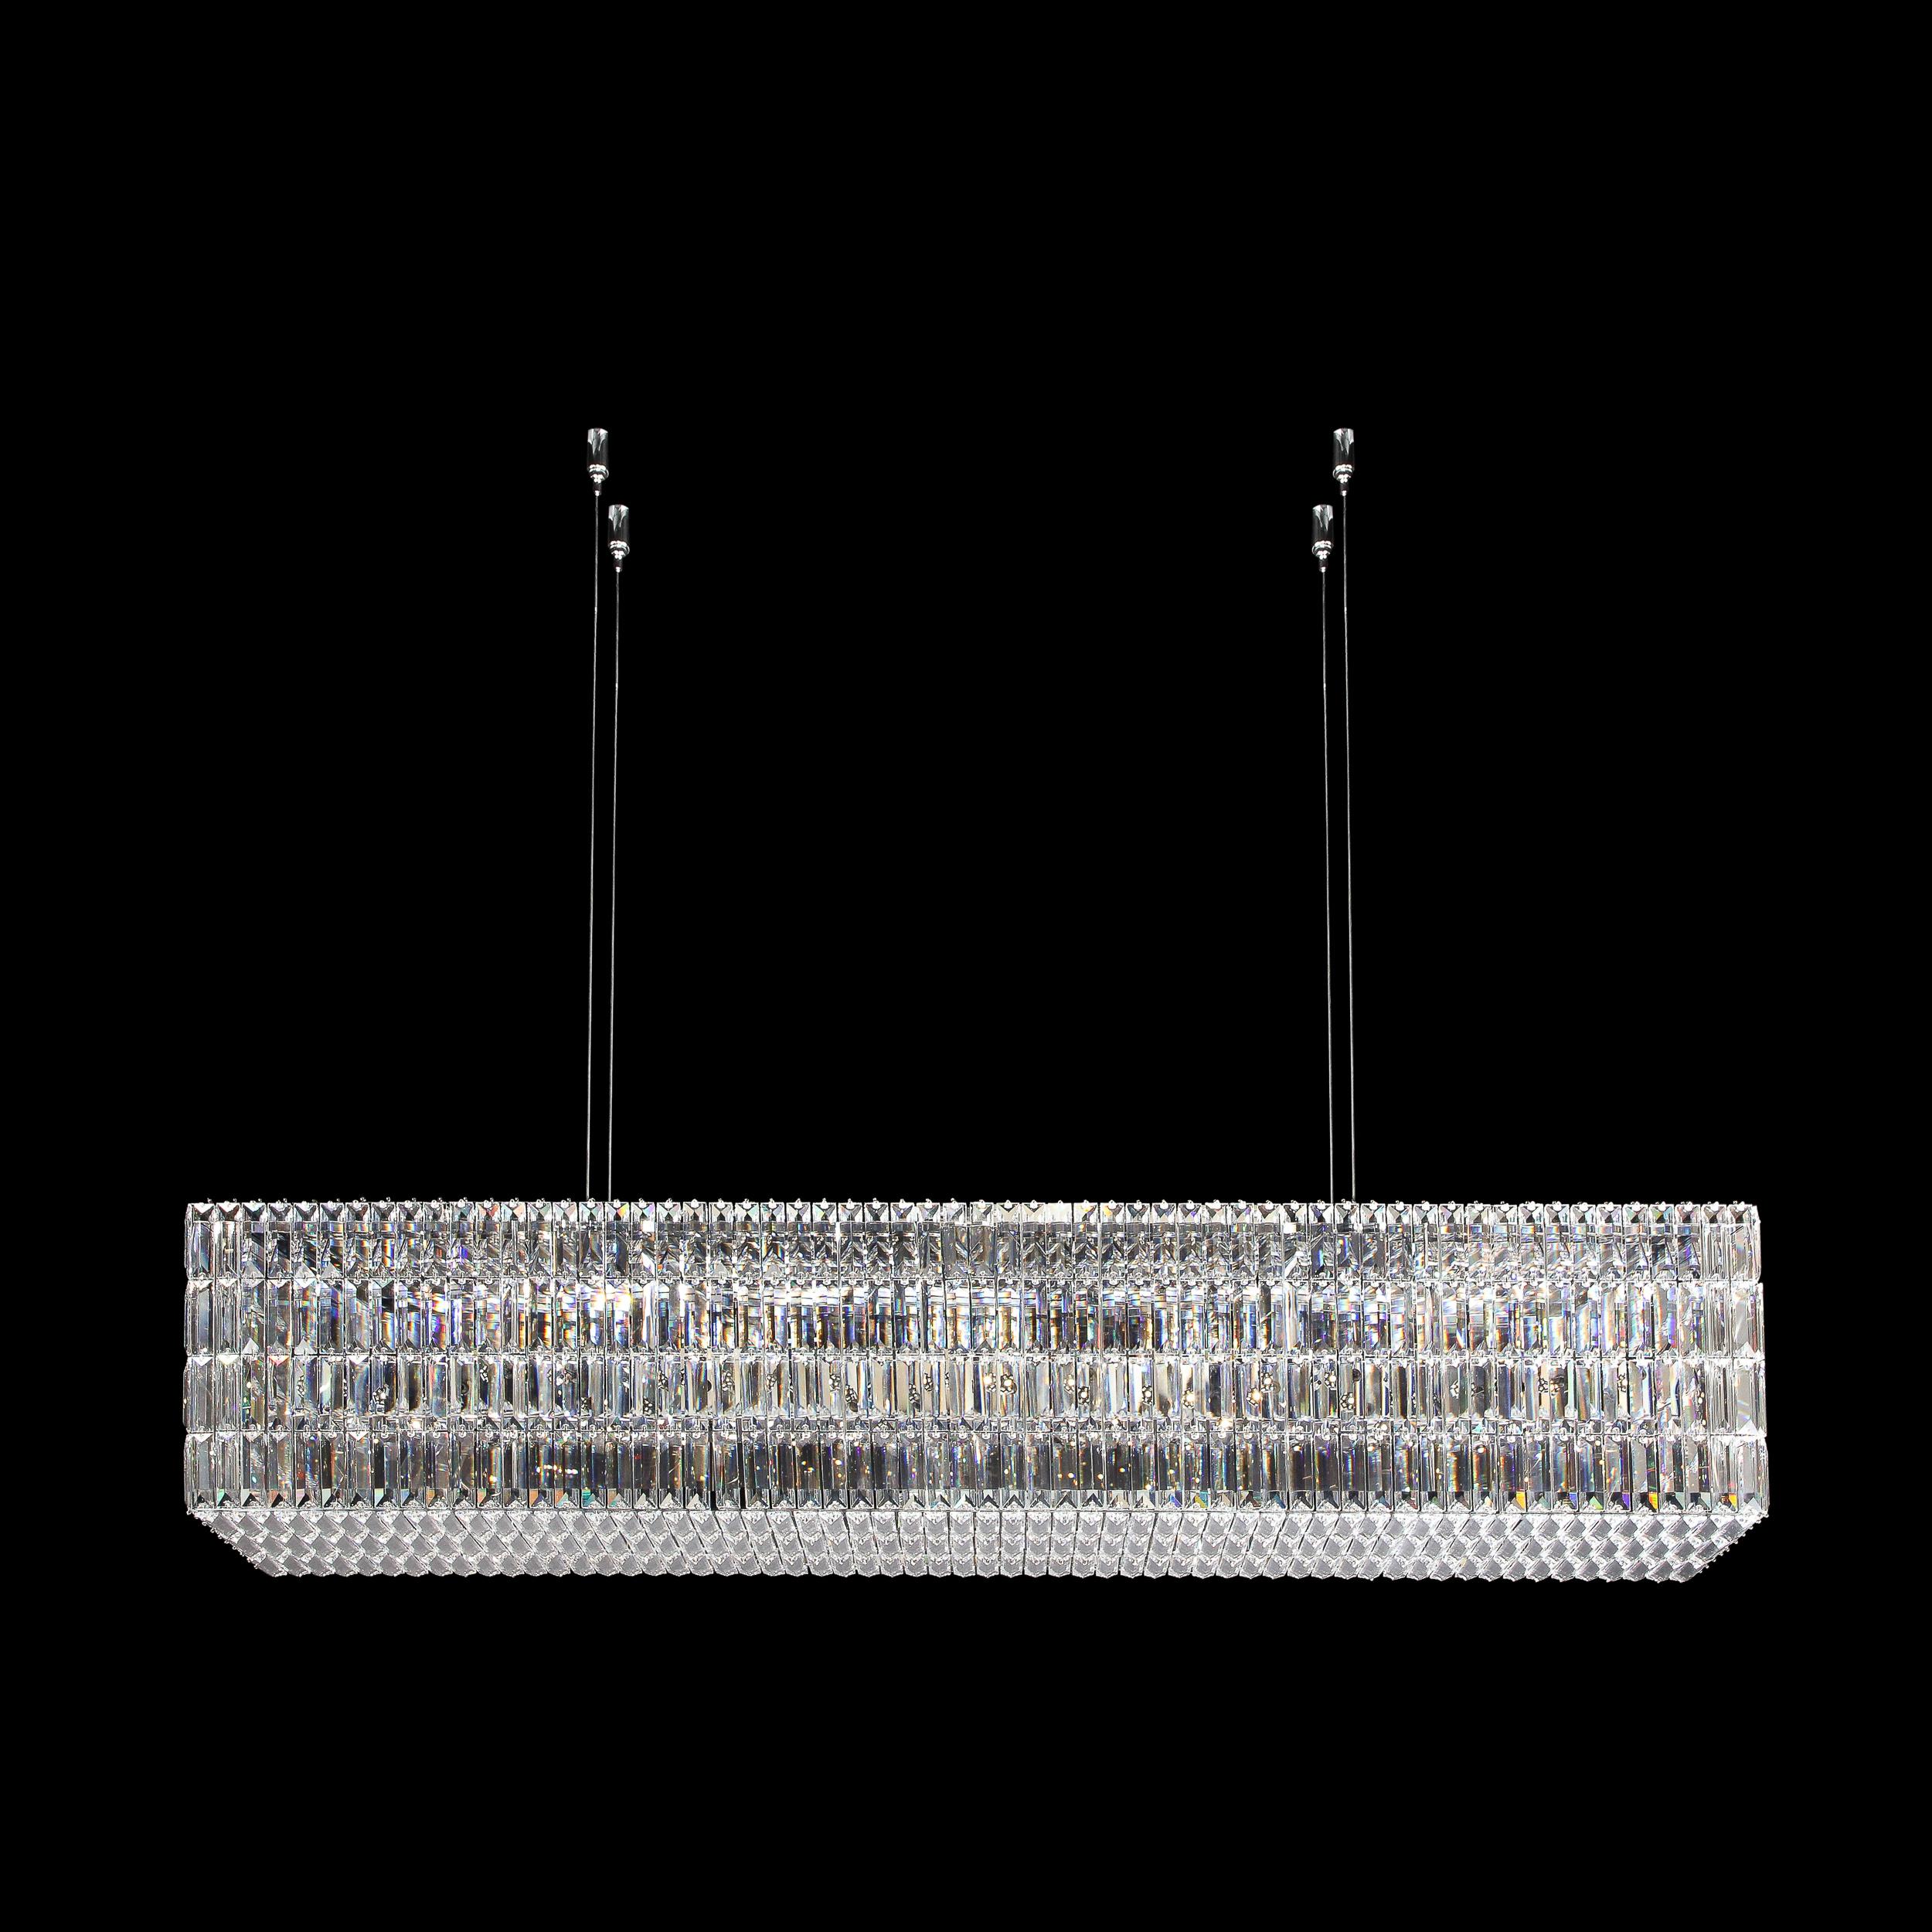 Austrian Modernist Glitterbox Chandelier in Crystal and Polished Chrome by Swarovski For Sale